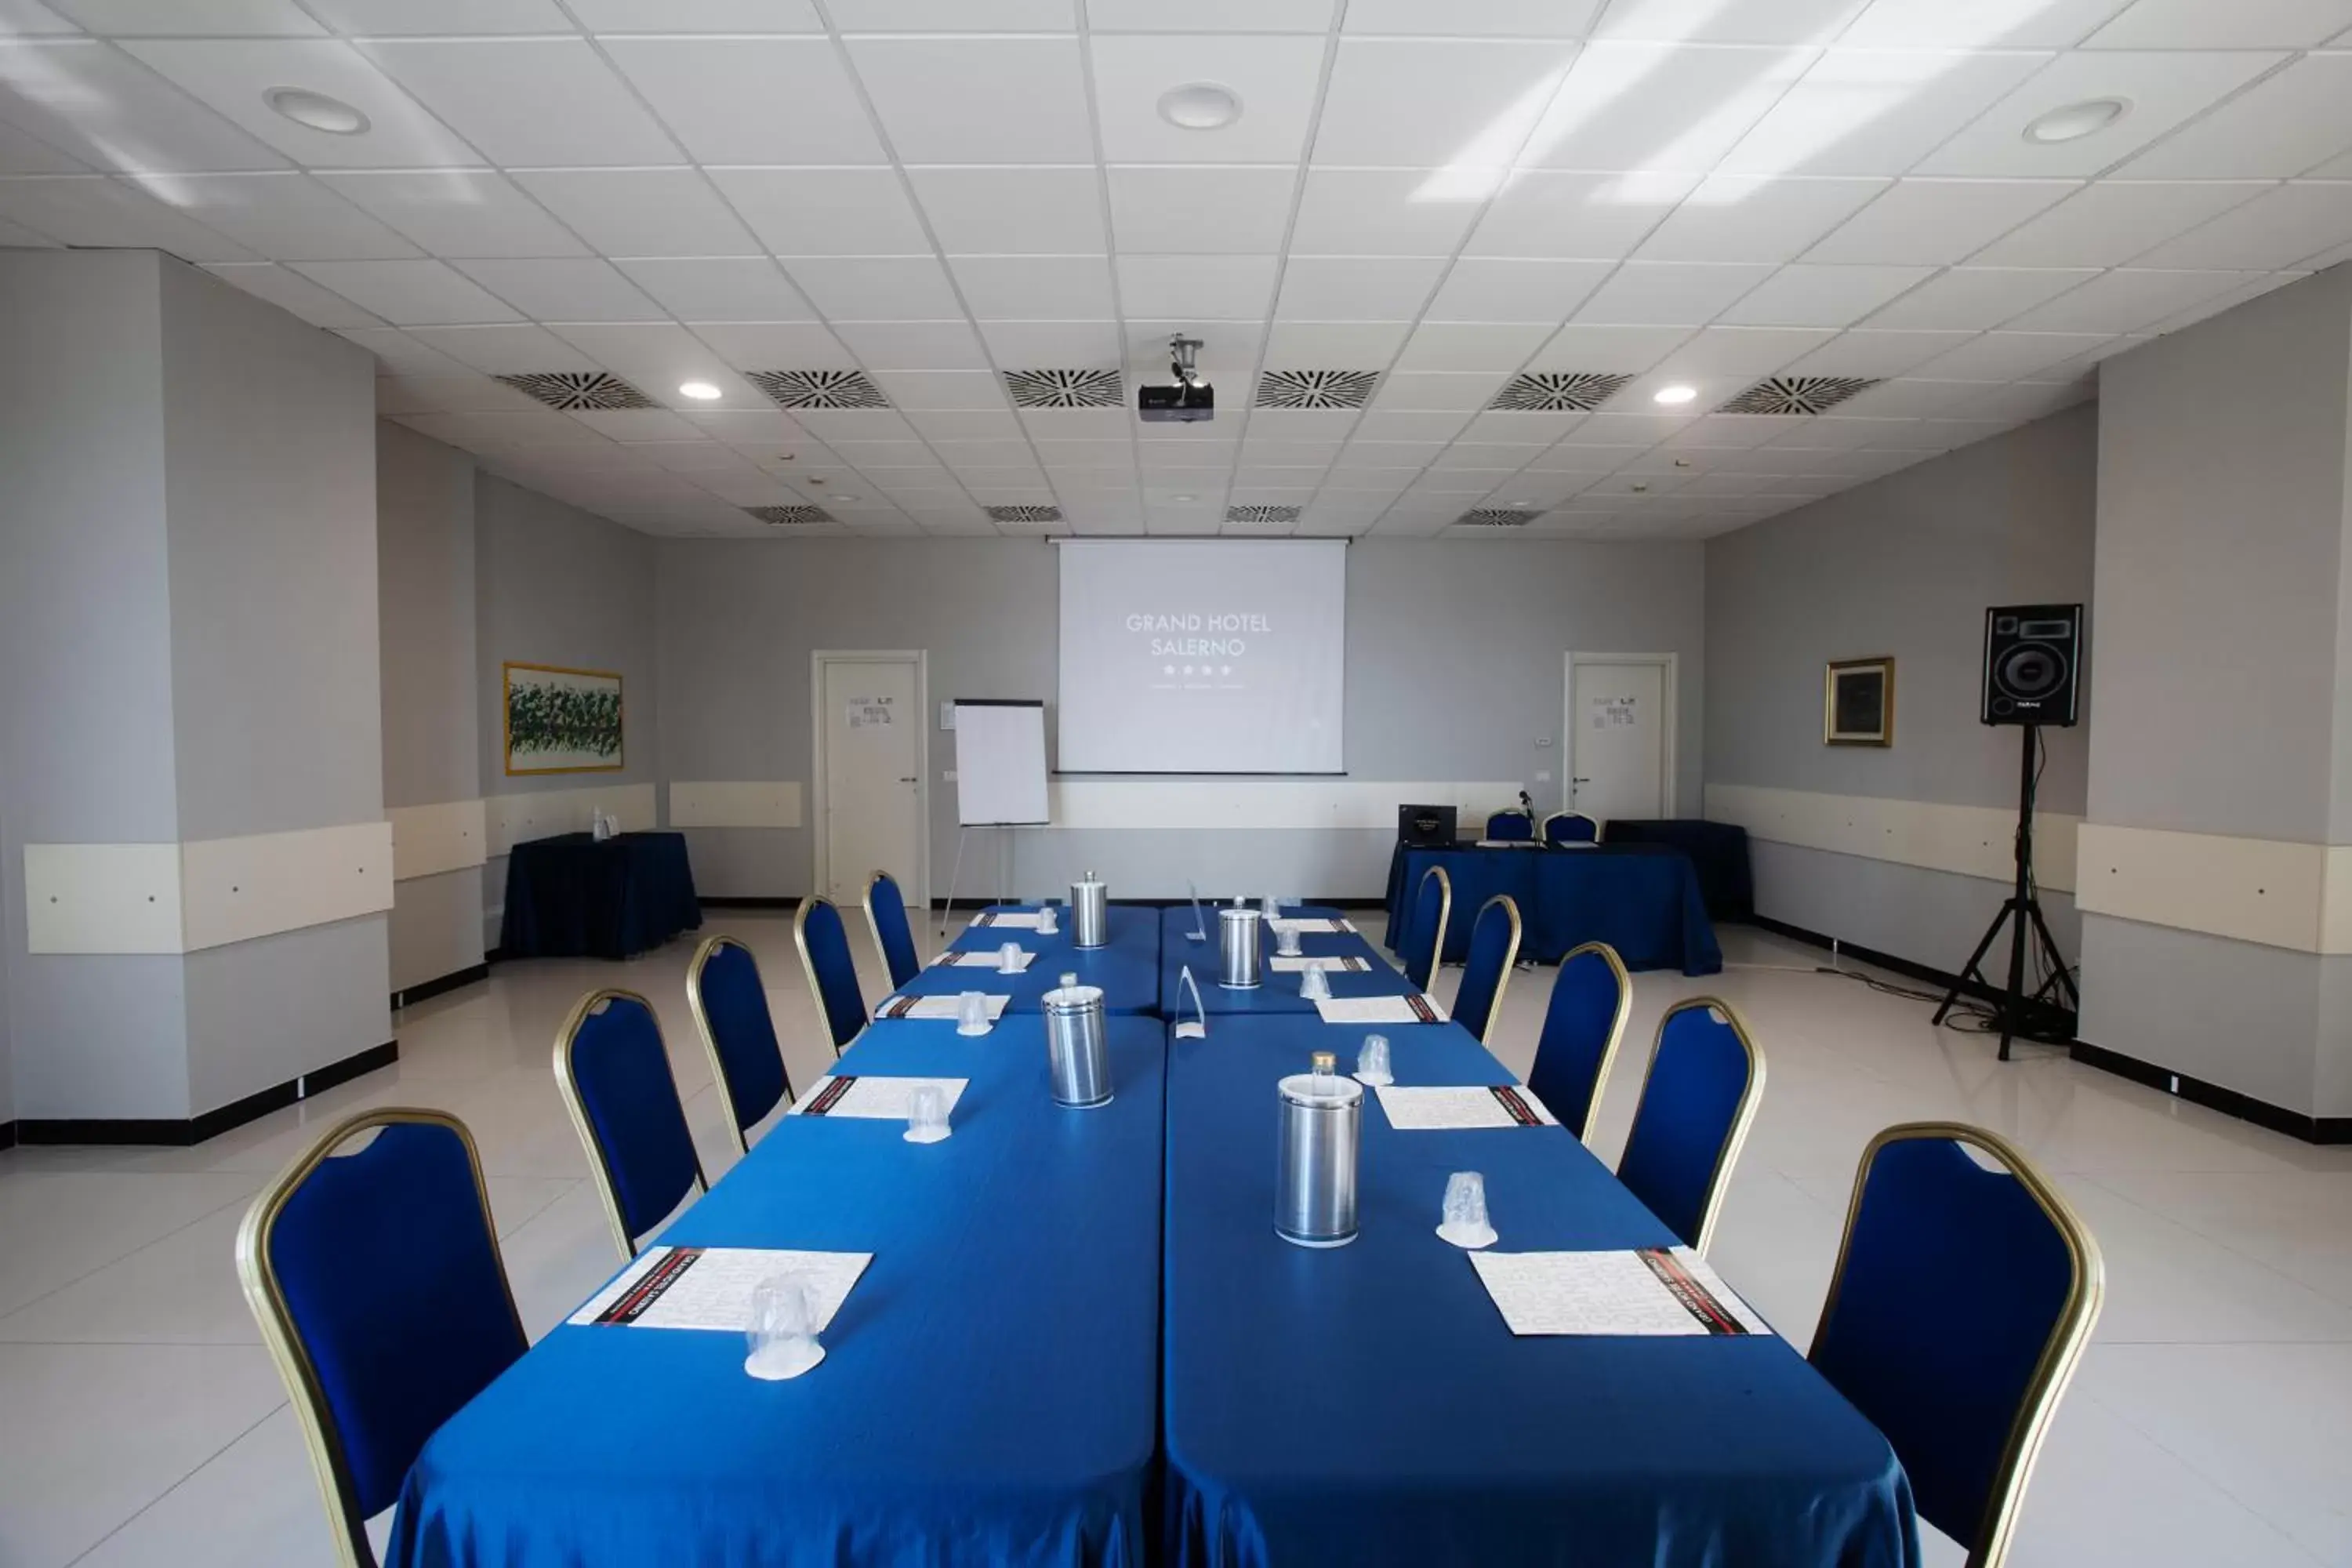 Meeting/conference room in Grand Hotel Salerno